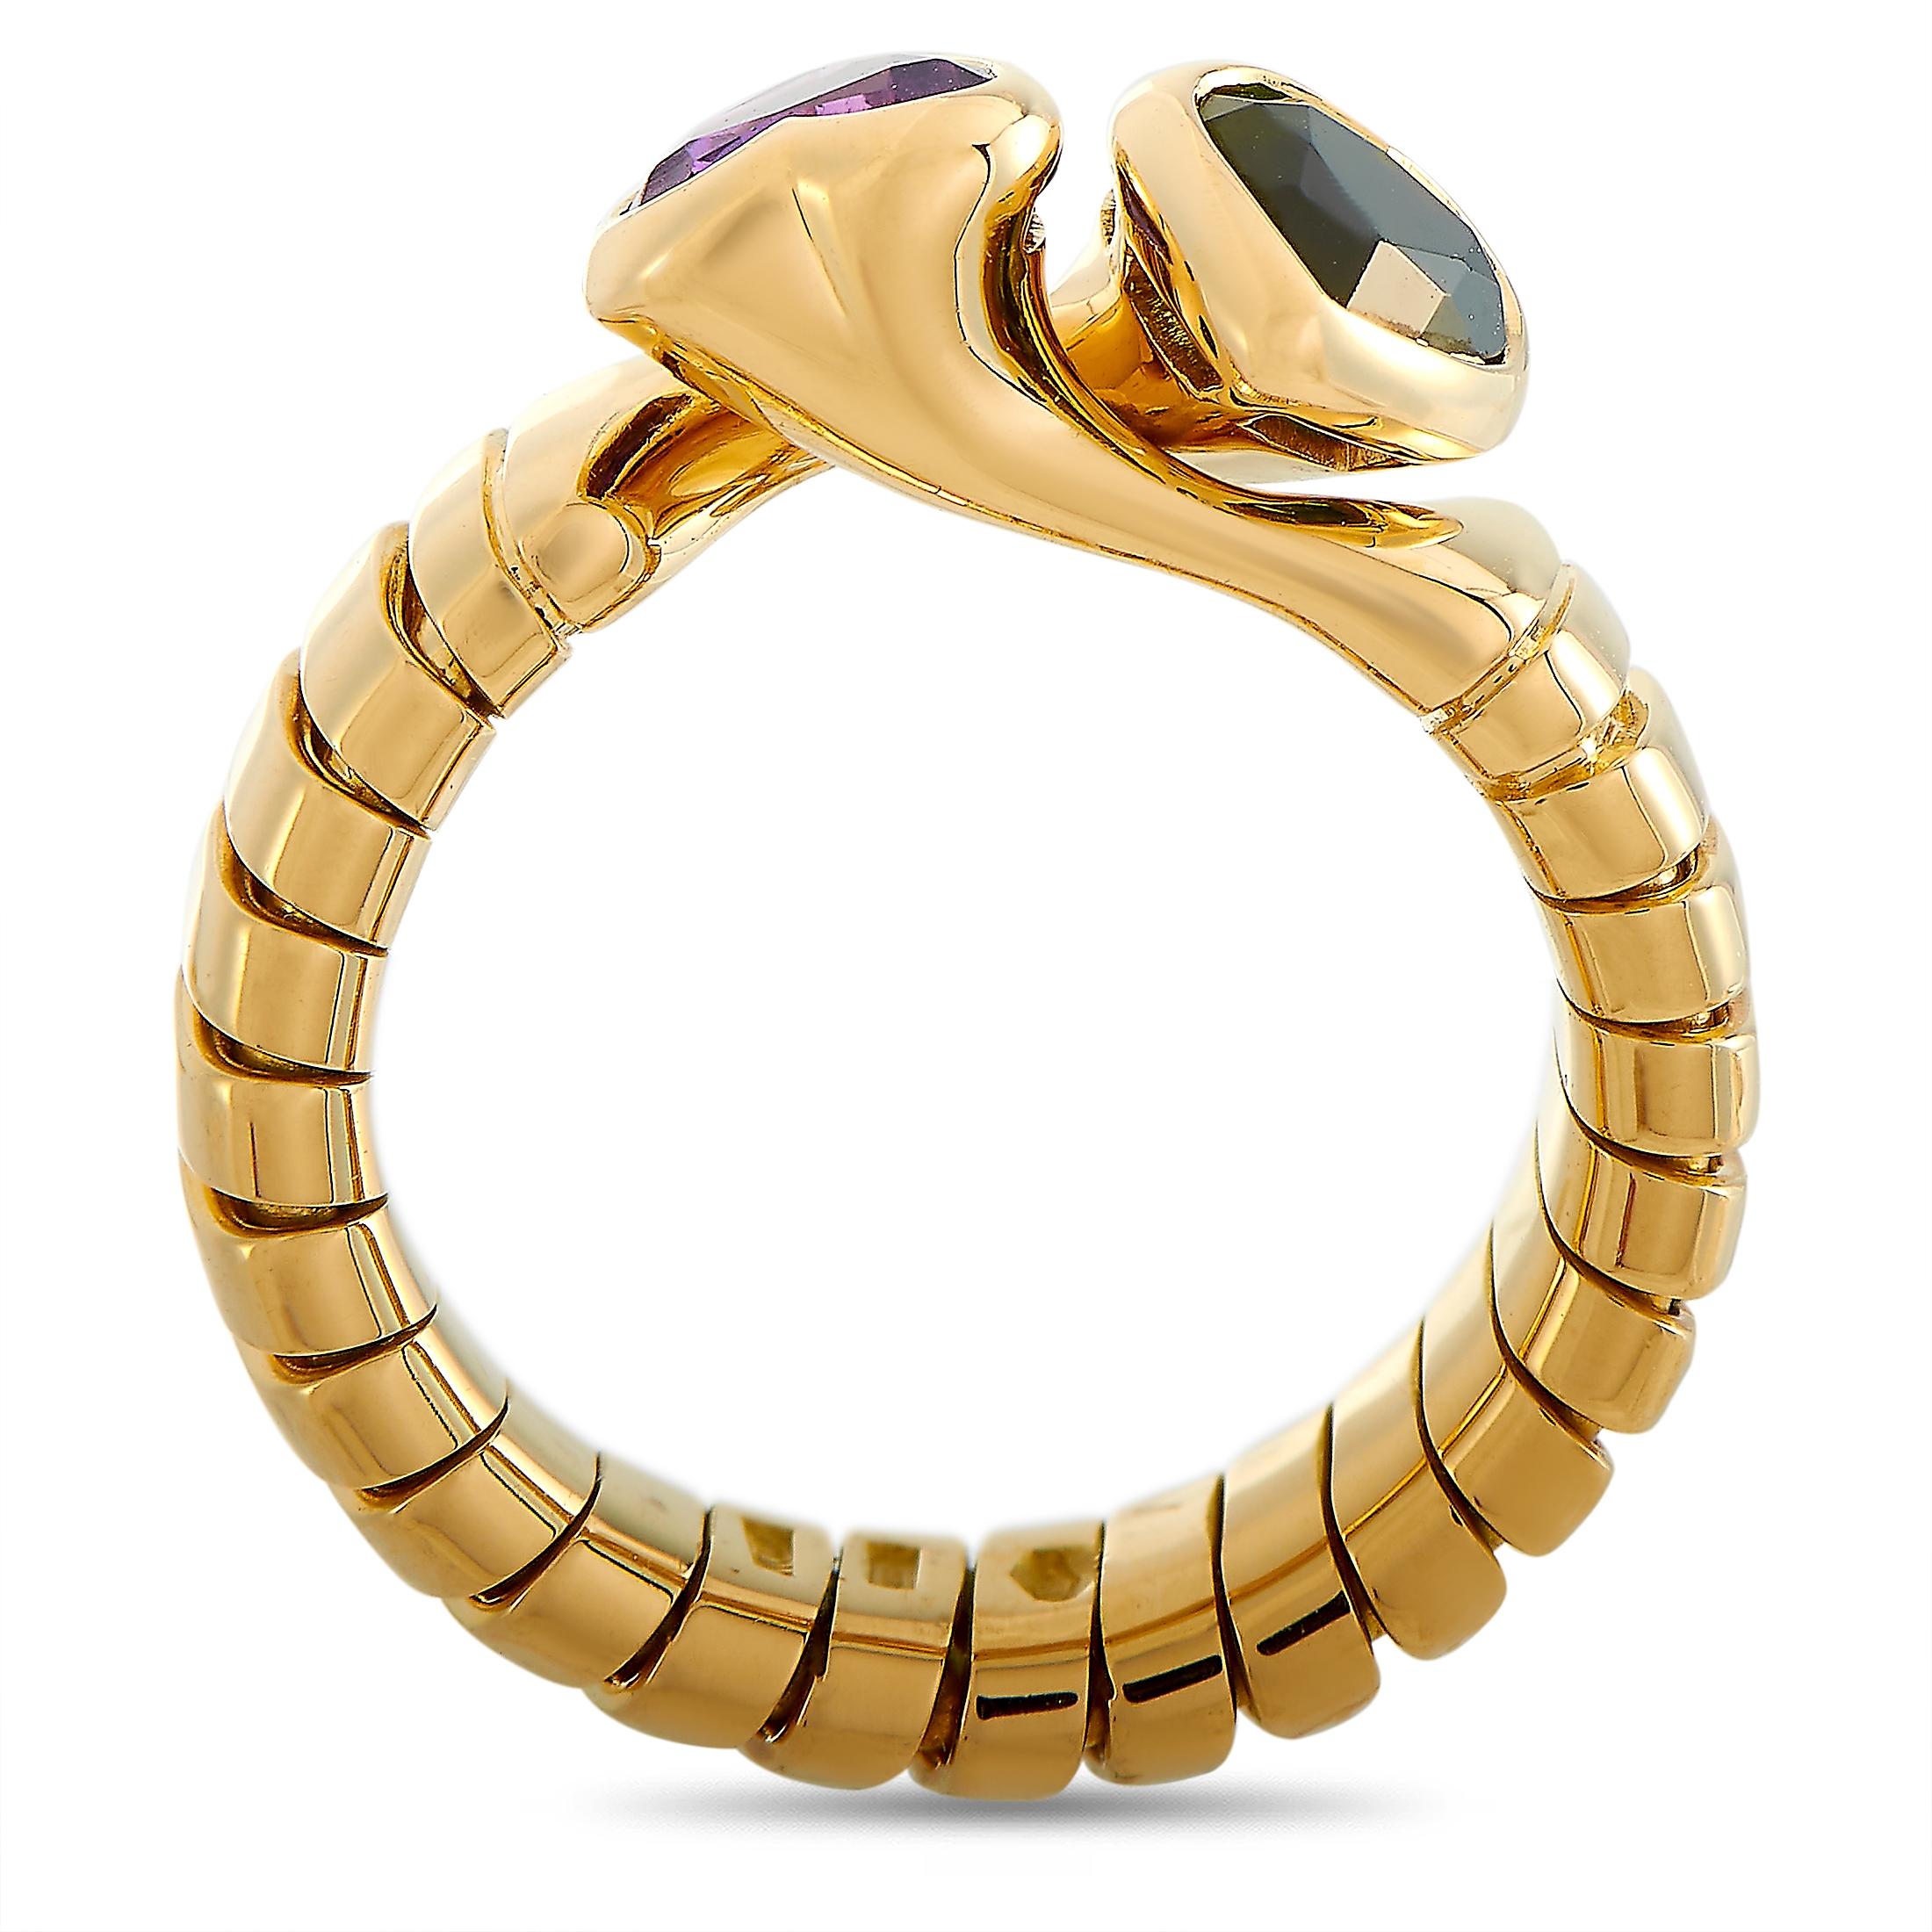 This Bvlgari ring is made of 18K yellow gold and embellished with a peridot and an amethyst. The ring weighs 8.6 grams and boasts band thickness of 5 mm and top height of 5 mm, while top dimensions measure 8 by 12 mm.
 
 Offered in estate condition,